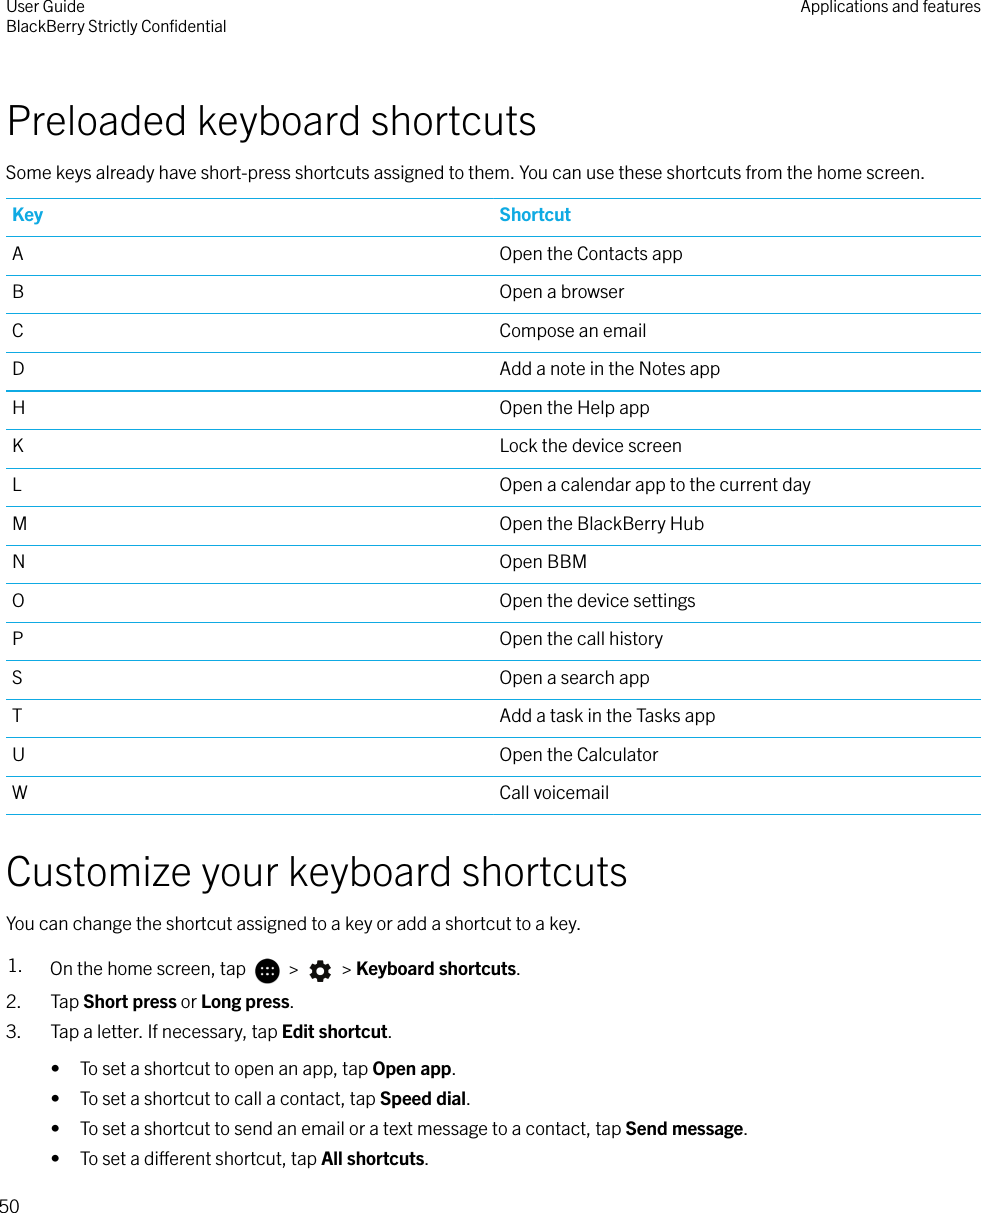 Preloaded keyboard shortcutsSome keys already have short-press shortcuts assigned to them. You can use these shortcuts from the home screen.Key ShortcutA Open the Contacts appB Open a browserC Compose an emailD Add a note in the Notes appH Open the Help appK Lock the device screenL Open a calendar app to the current dayM Open the BlackBerry HubN Open BBMO Open the device settingsP Open the call historyS Open a search appT Add a task in the Tasks appU Open the CalculatorW Call voicemailCustomize your keyboard shortcutsYou can change the shortcut assigned to a key or add a shortcut to a key.1. On the home screen, tap   &gt;   &gt; Keyboard shortcuts.2. Tap Short press or Long press.3. Tap a letter. If necessary, tap Edit shortcut.• To set a shortcut to open an app, tap Open app.• To set a shortcut to call a contact, tap Speed dial.• To set a shortcut to send an email or a text message to a contact, tap Send message.• To set a dierent shortcut, tap All shortcuts.User GuideBlackBerry Strictly ConﬁdentialApplications and features50